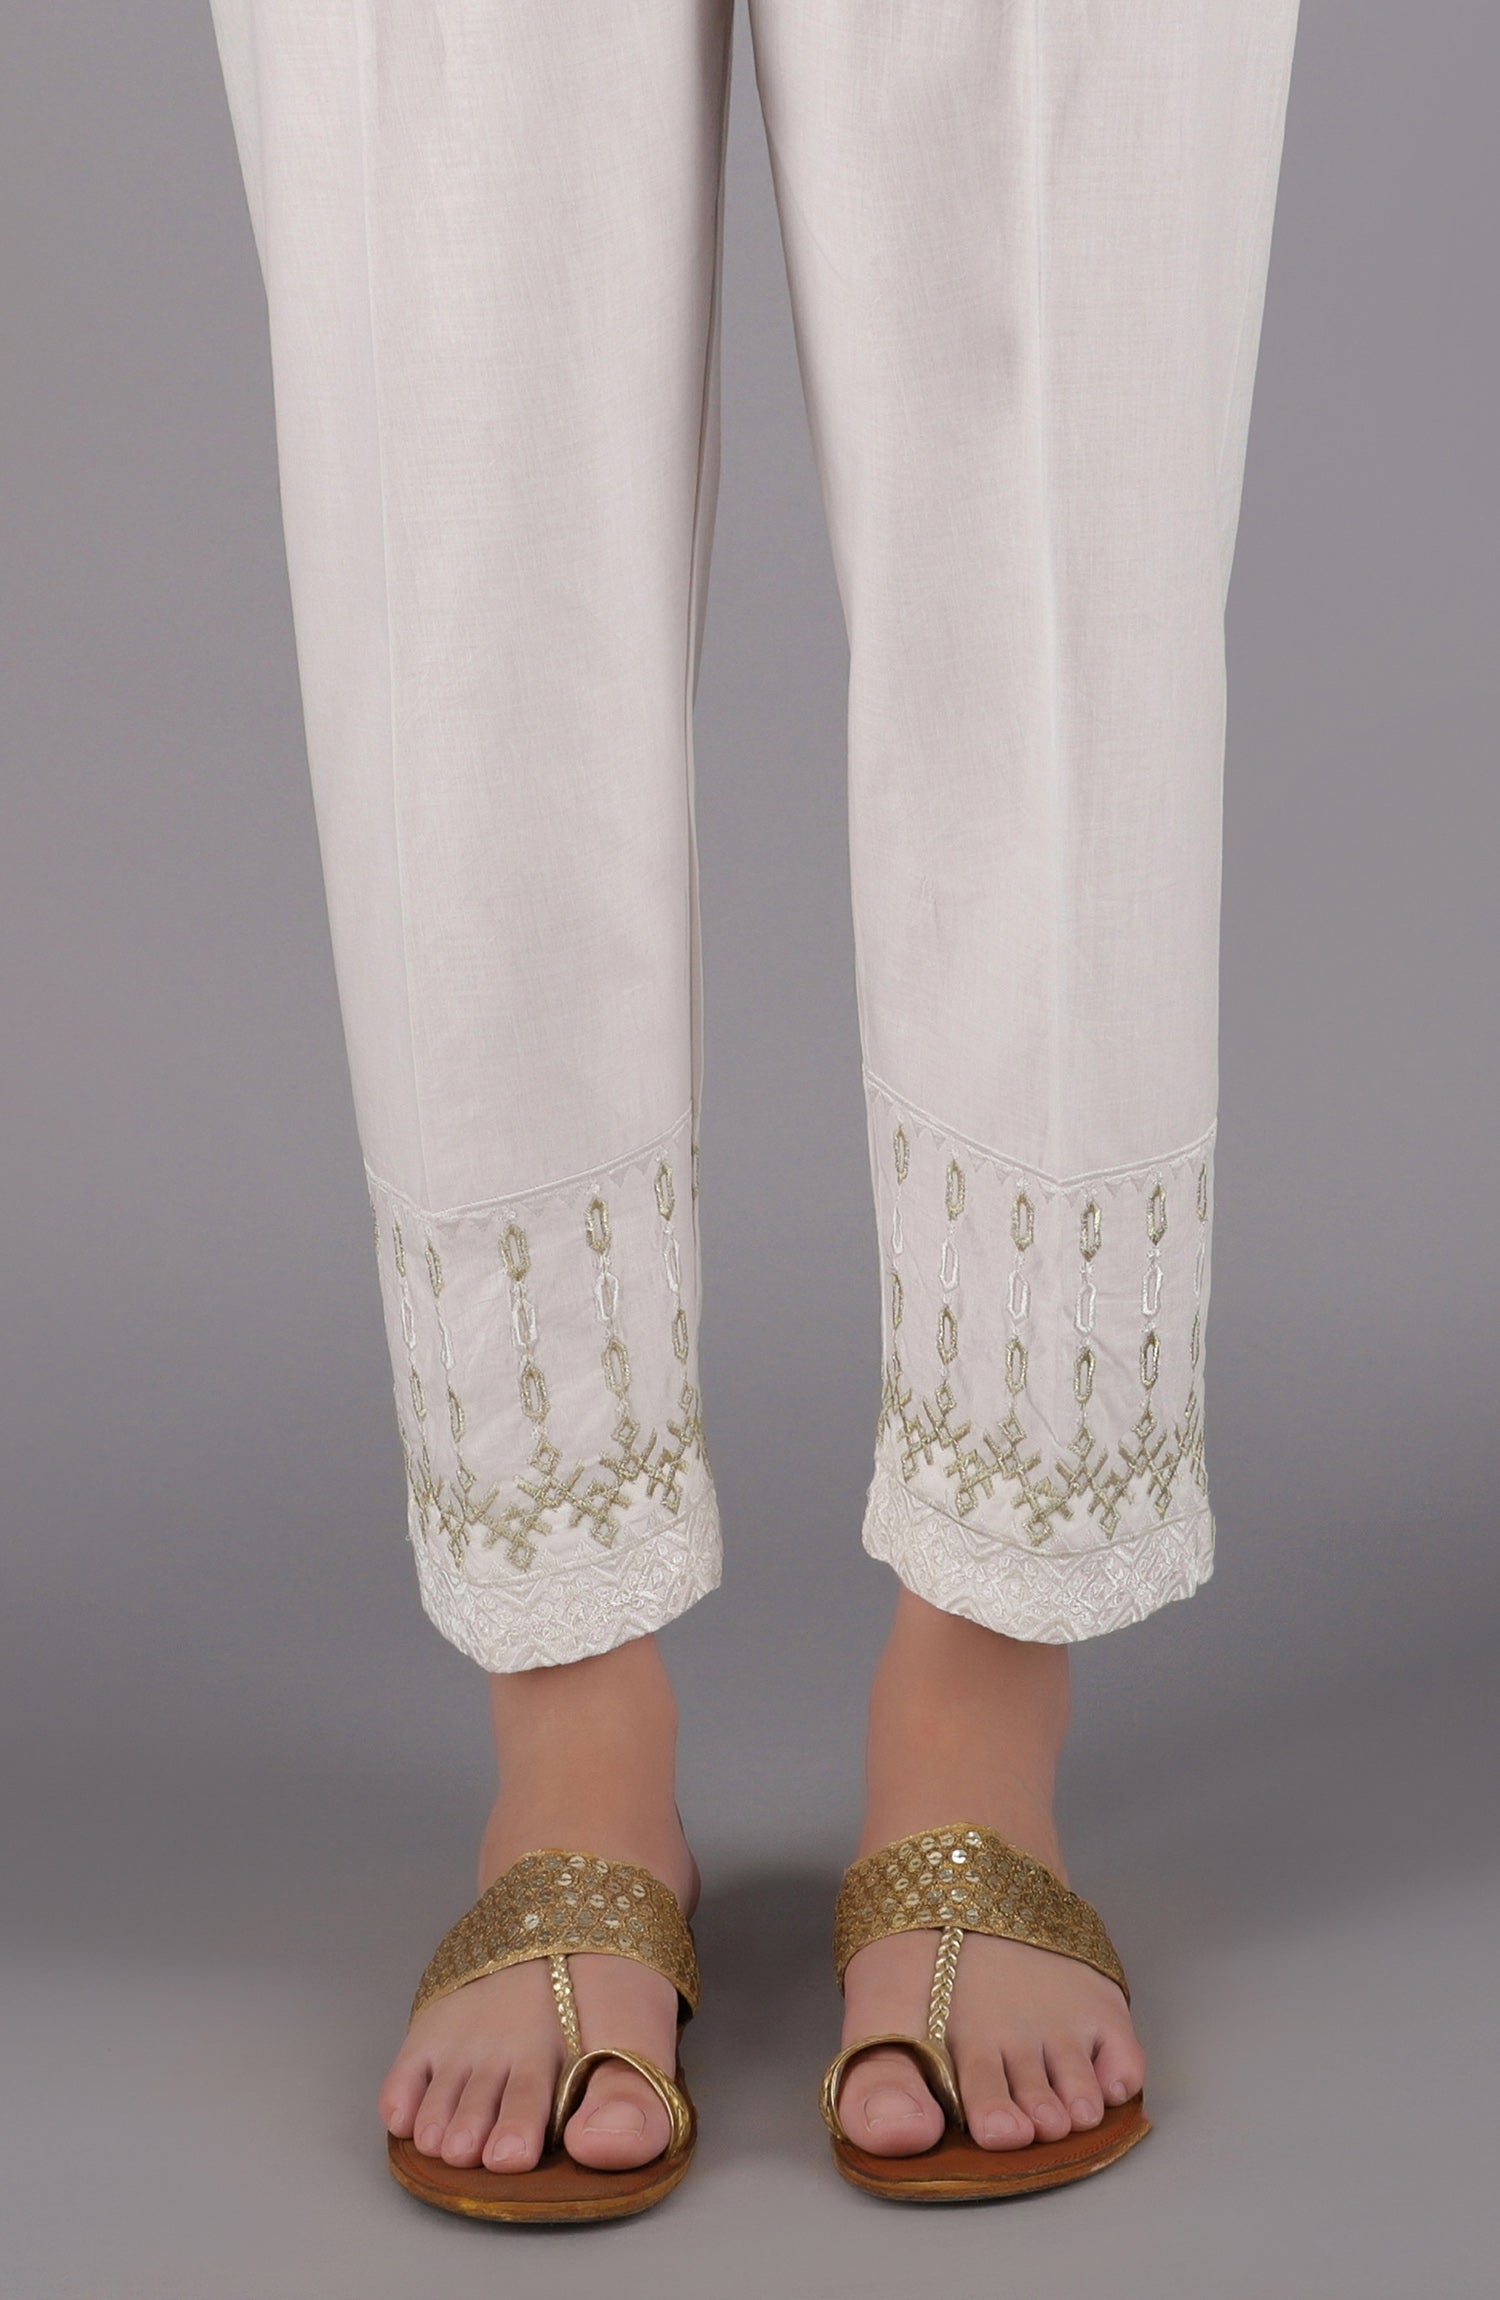 NRPE-54/S WHITE CAMBRIC SCPANTS STITCHED BOTTOMS PANTS